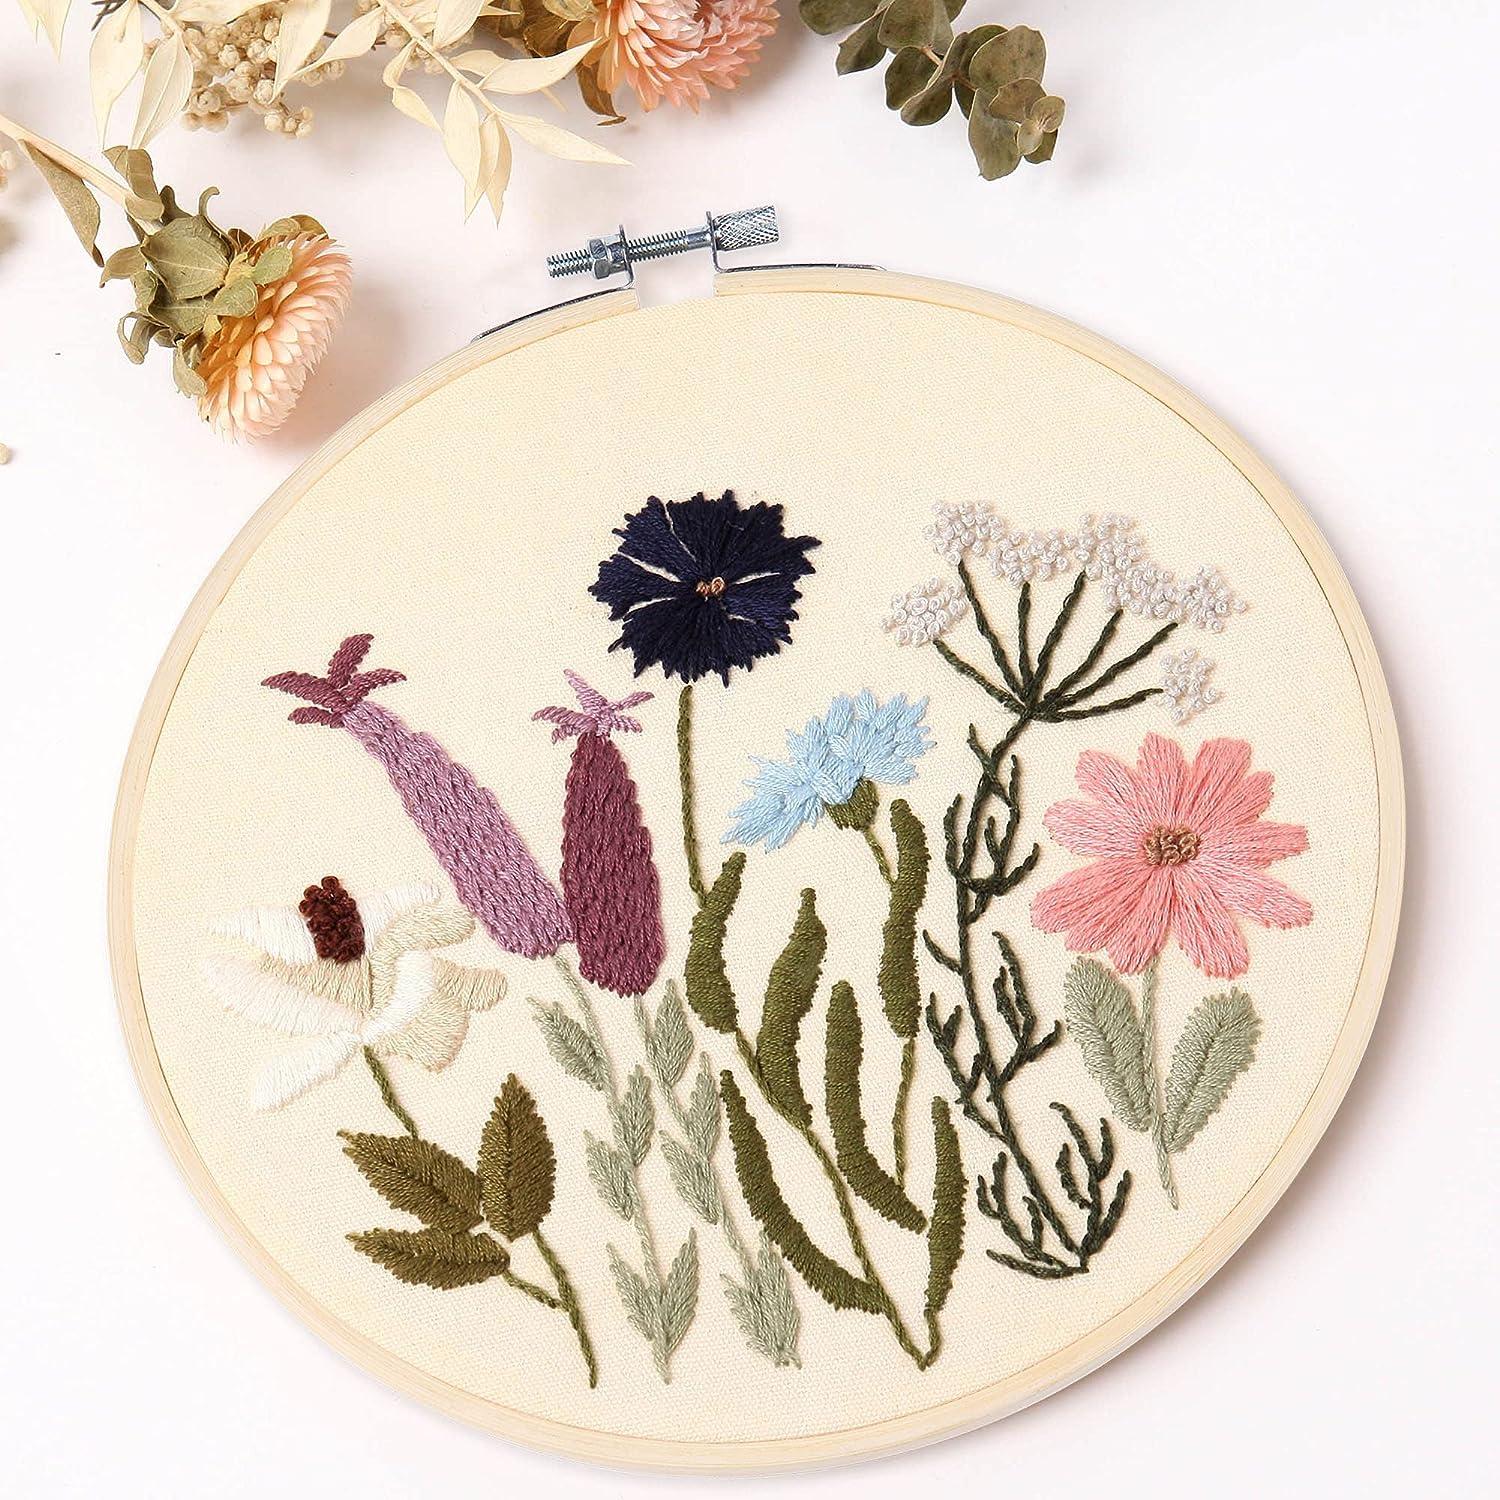 Floral Embroidery Kit for Beginners, DIY Kits for Adults, Floral